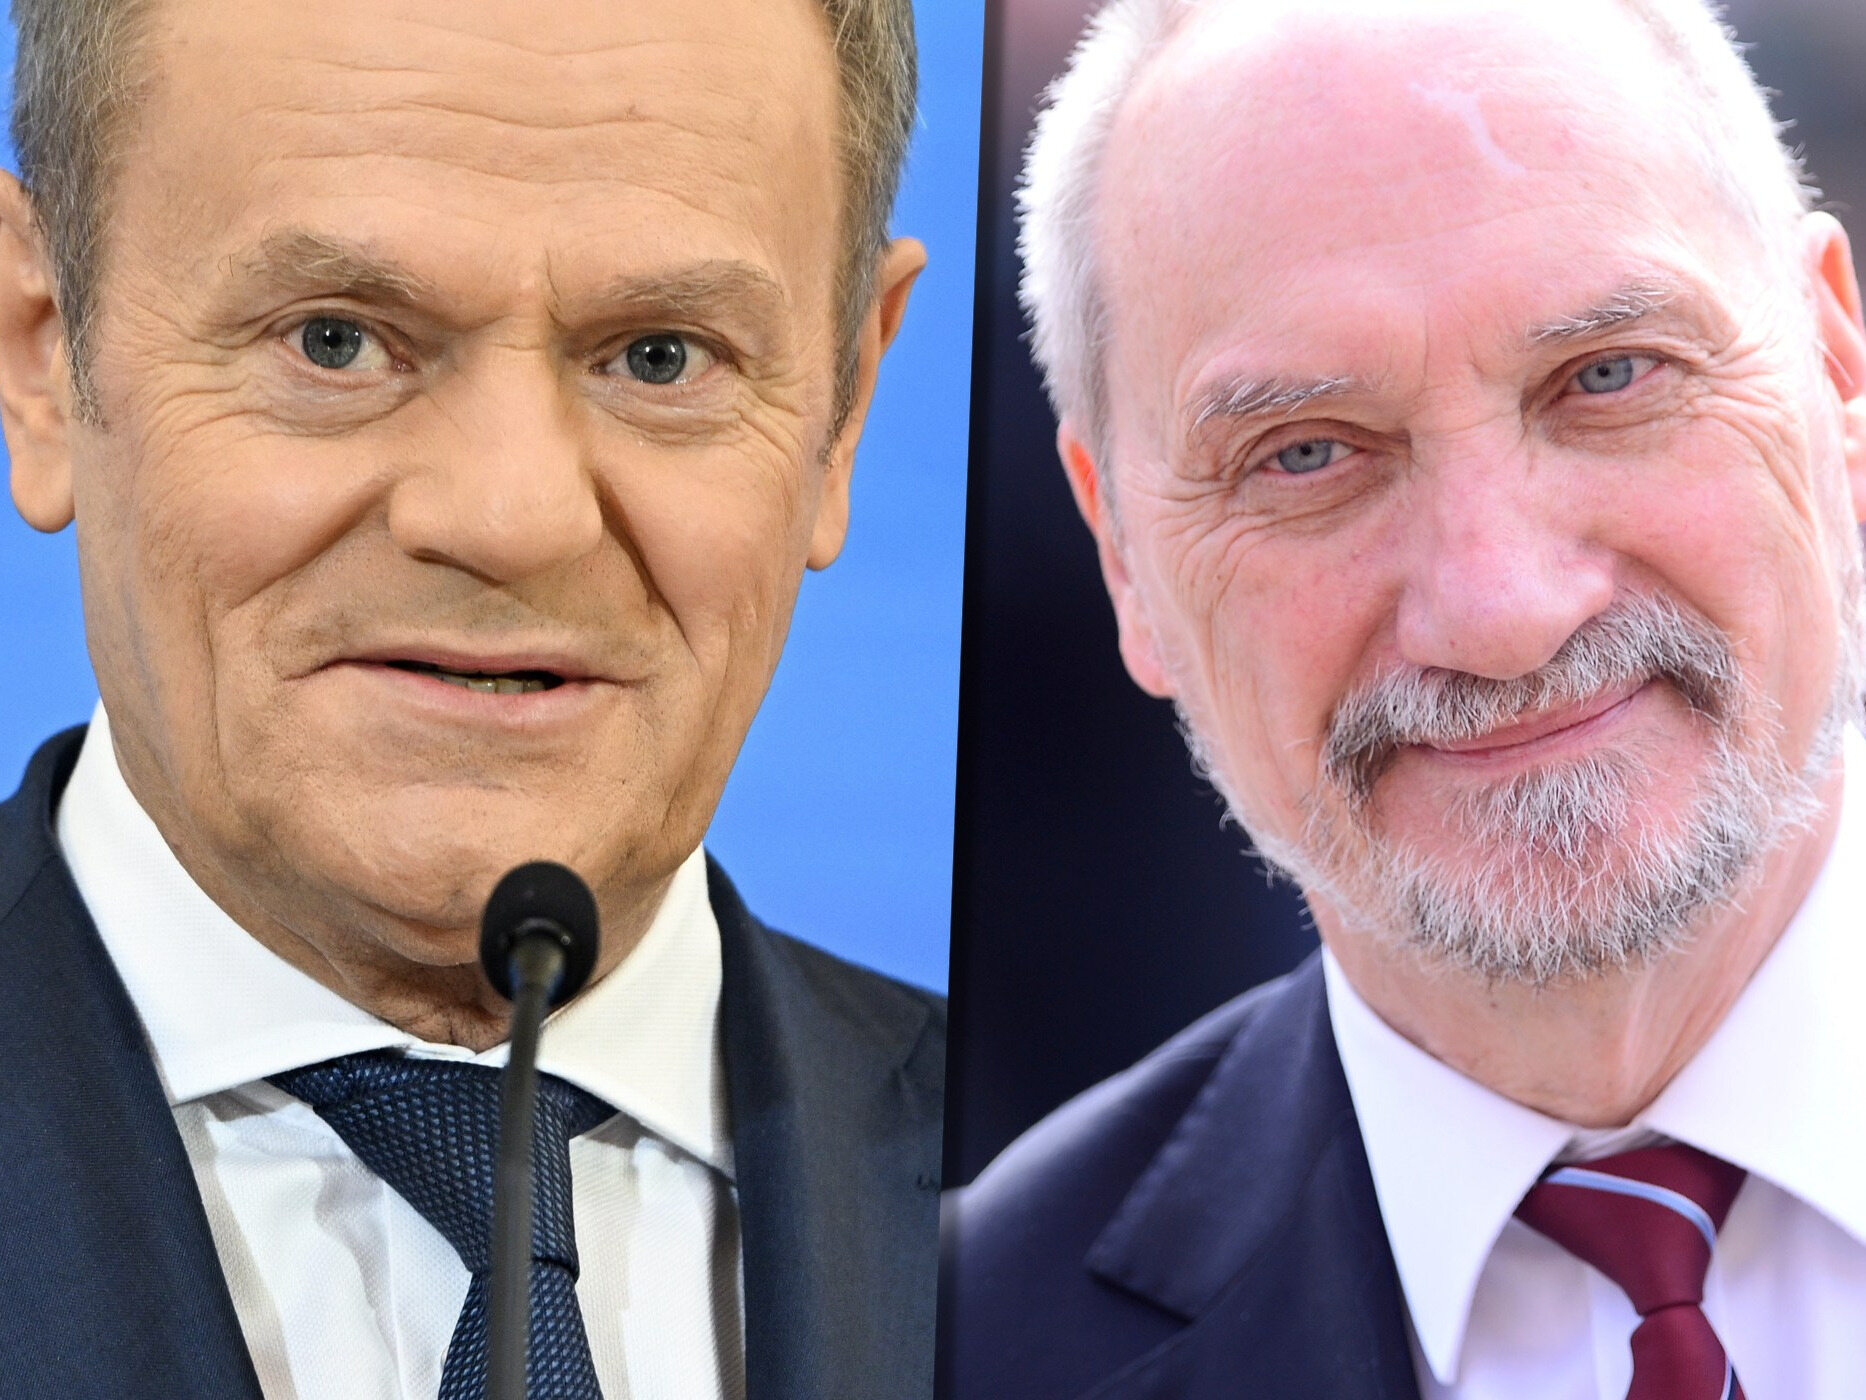 Tusk appreciated Macierewicz's move from the past.  "I was skeptical"